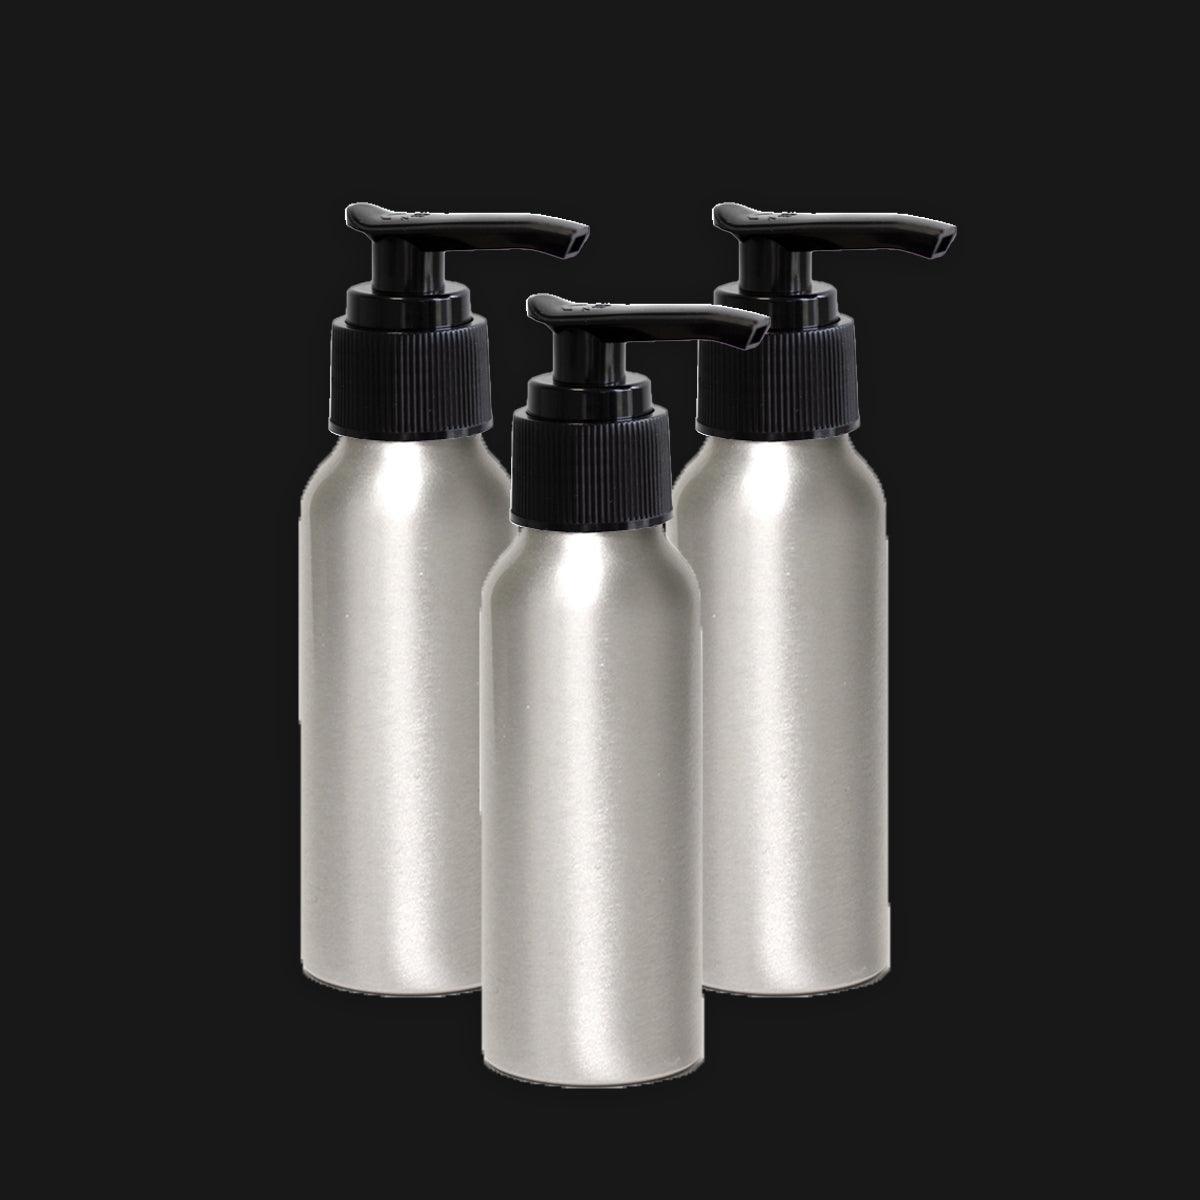 100ml aluminum bottle with lotion pump - 3 pack - local - letsbelocal.ca